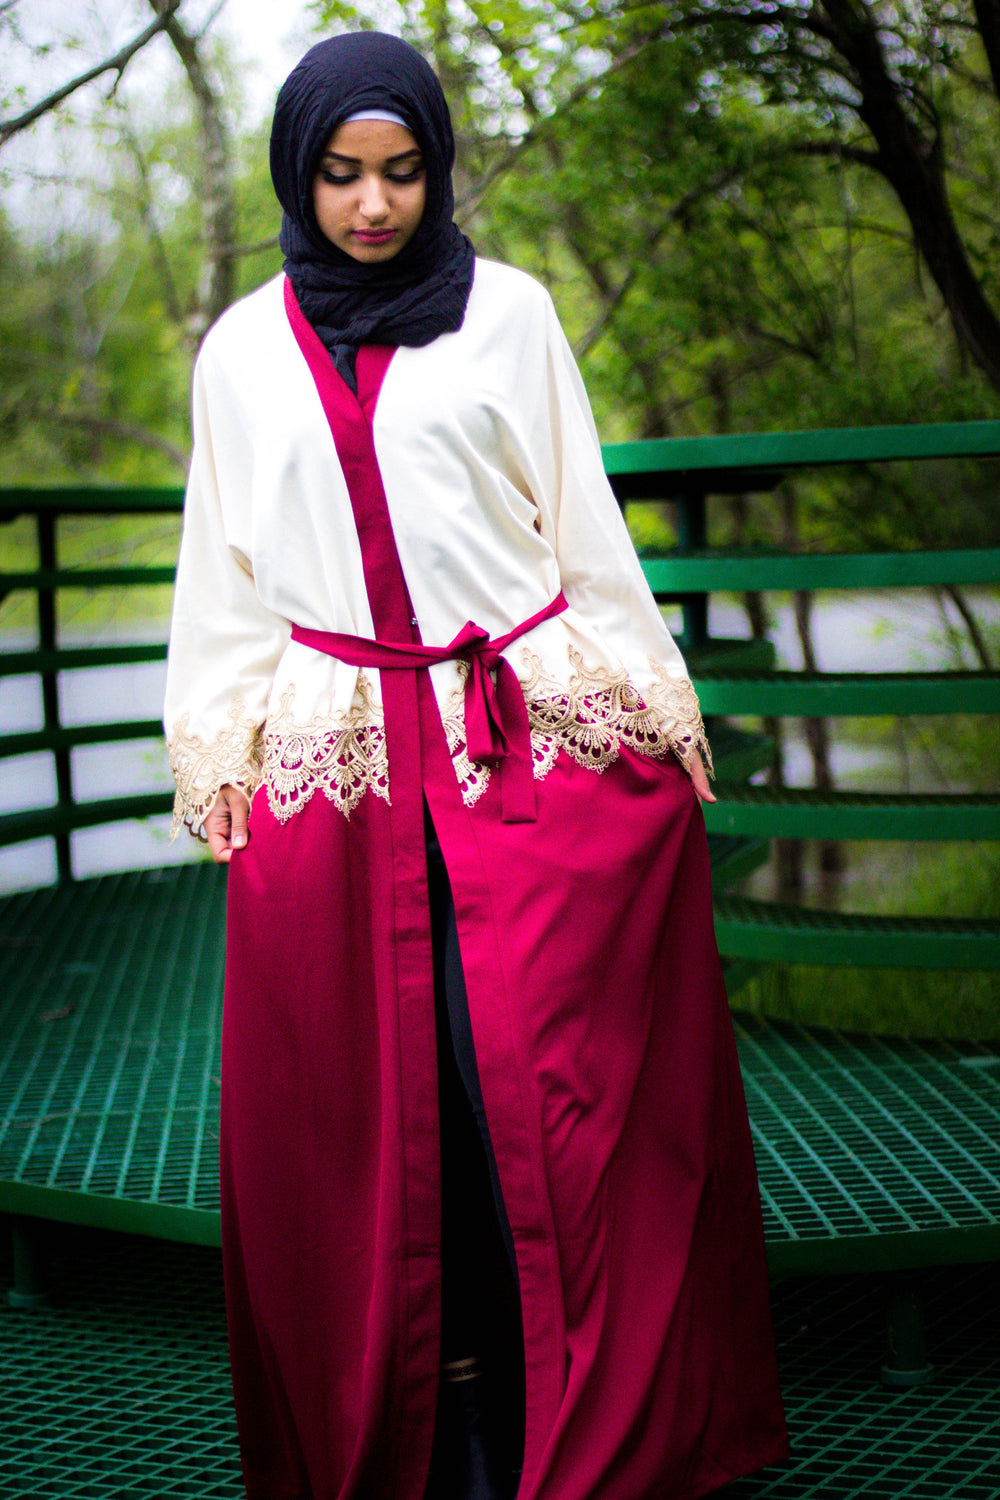 creme and maroon two toned abaya with gold trim and waist tie